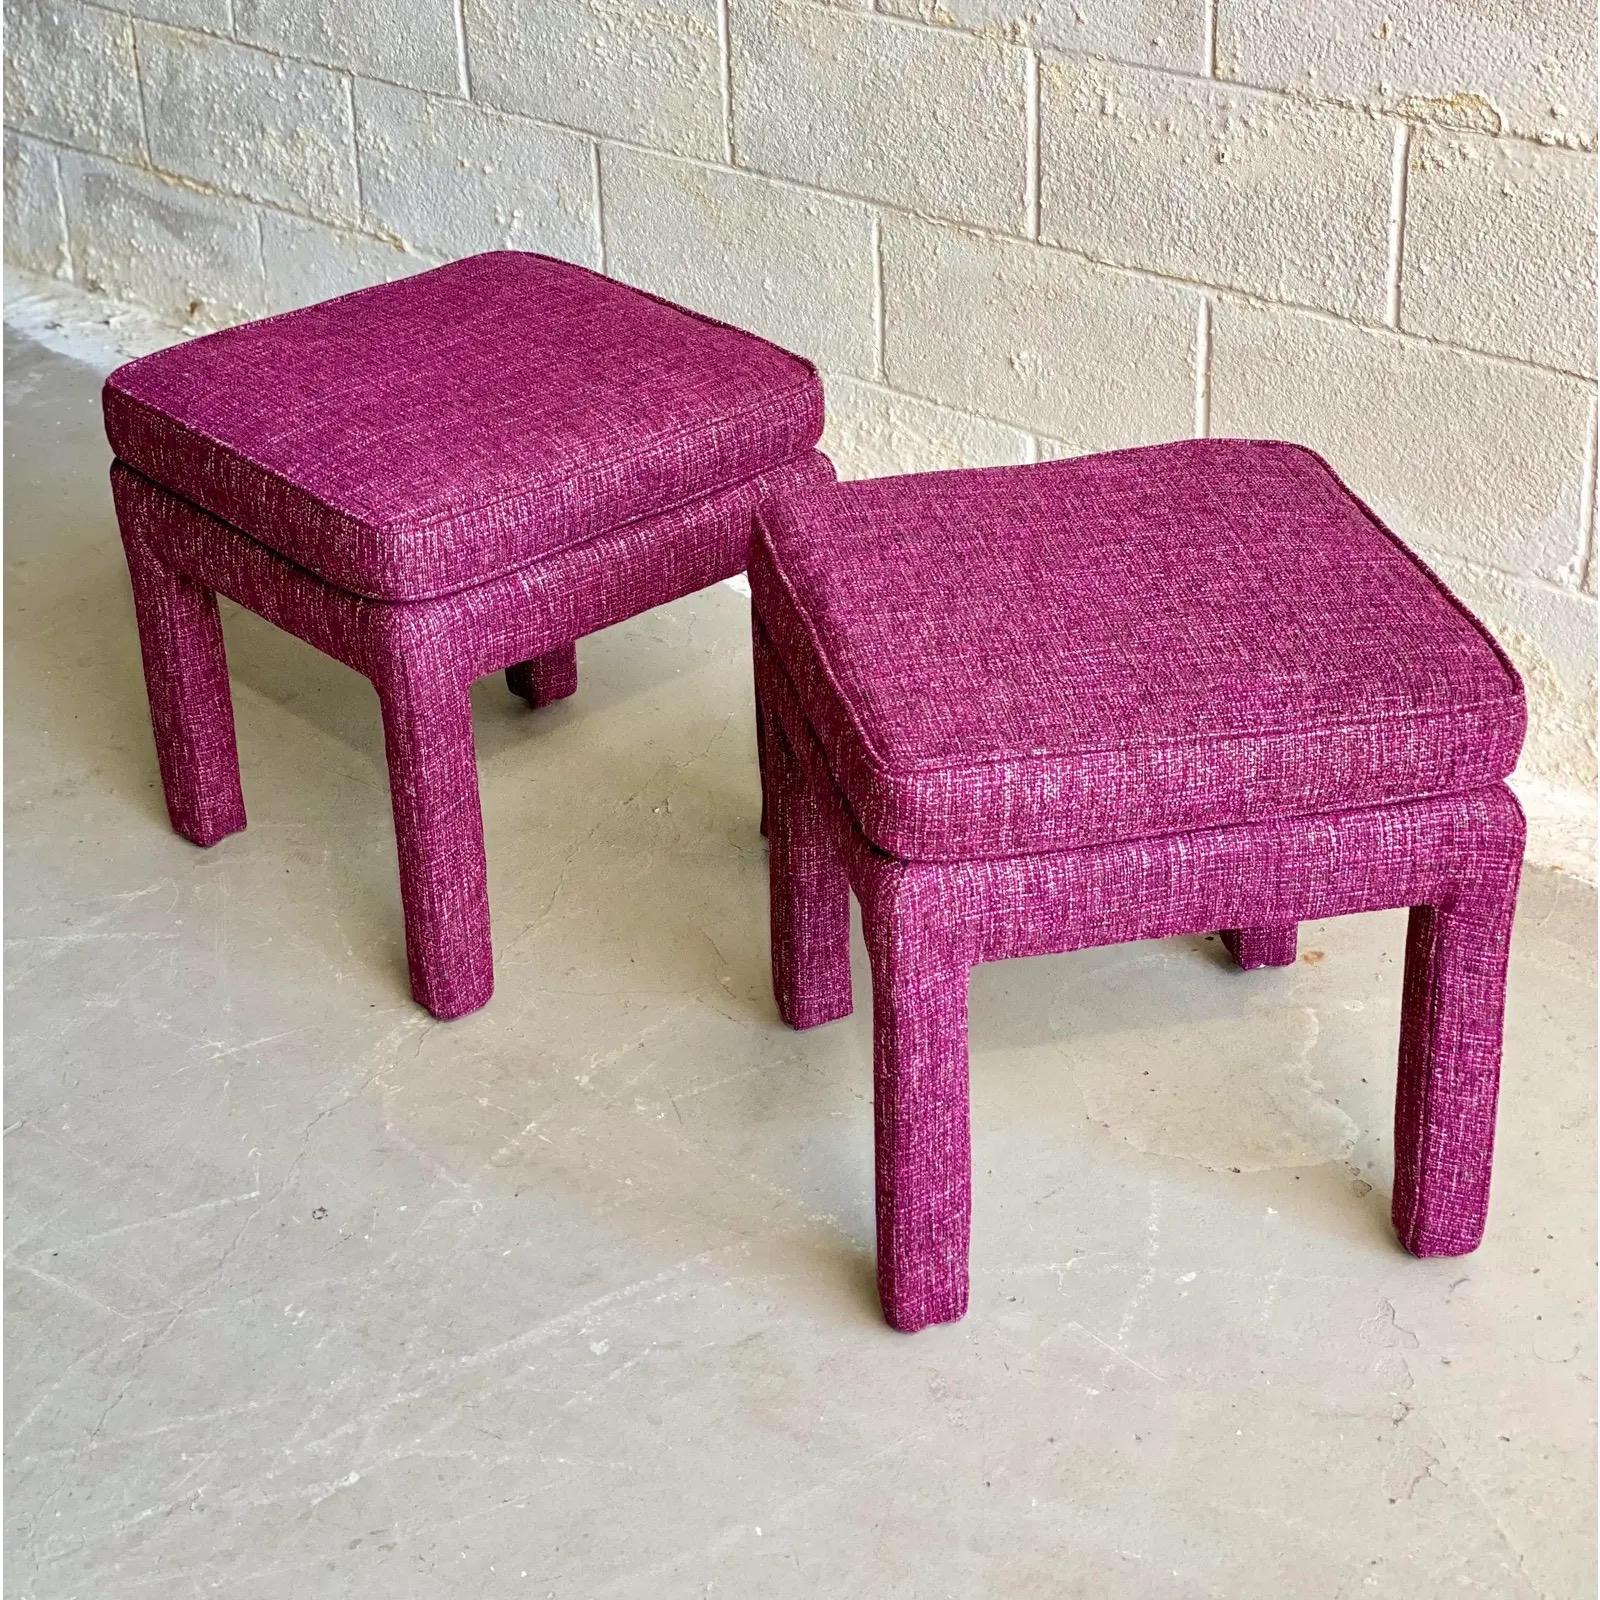 North American 1970s Milo Baughman Style Parsons Magenta Tweed Ottomans, a Pair